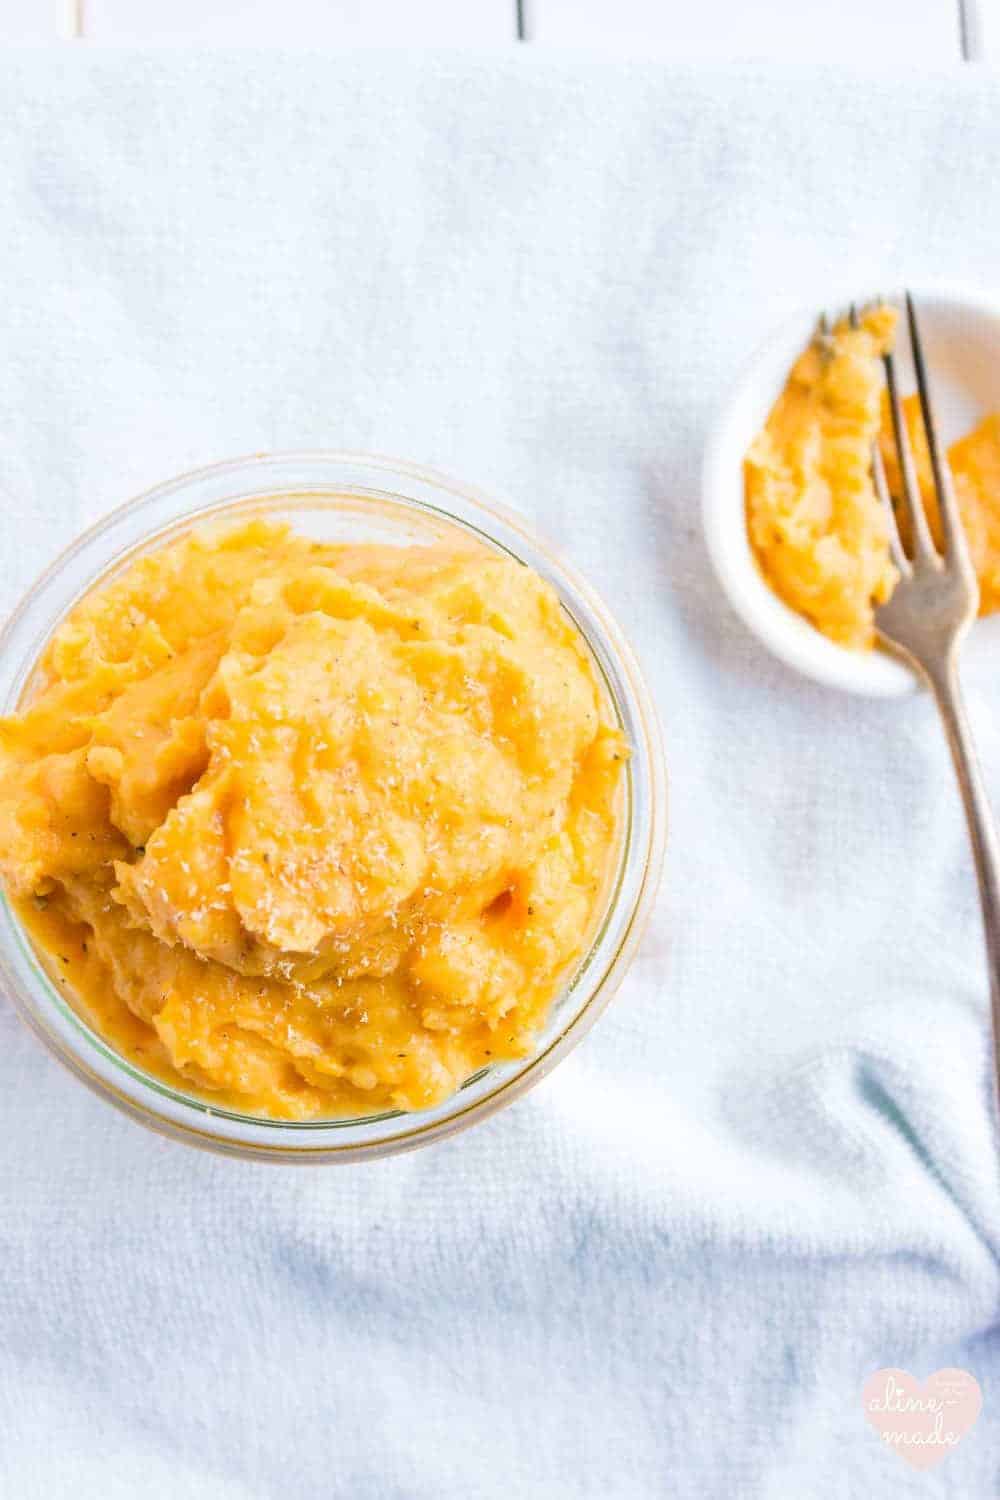 Steamed Mashed Sweet Potatoes - Creamy and Fluffy